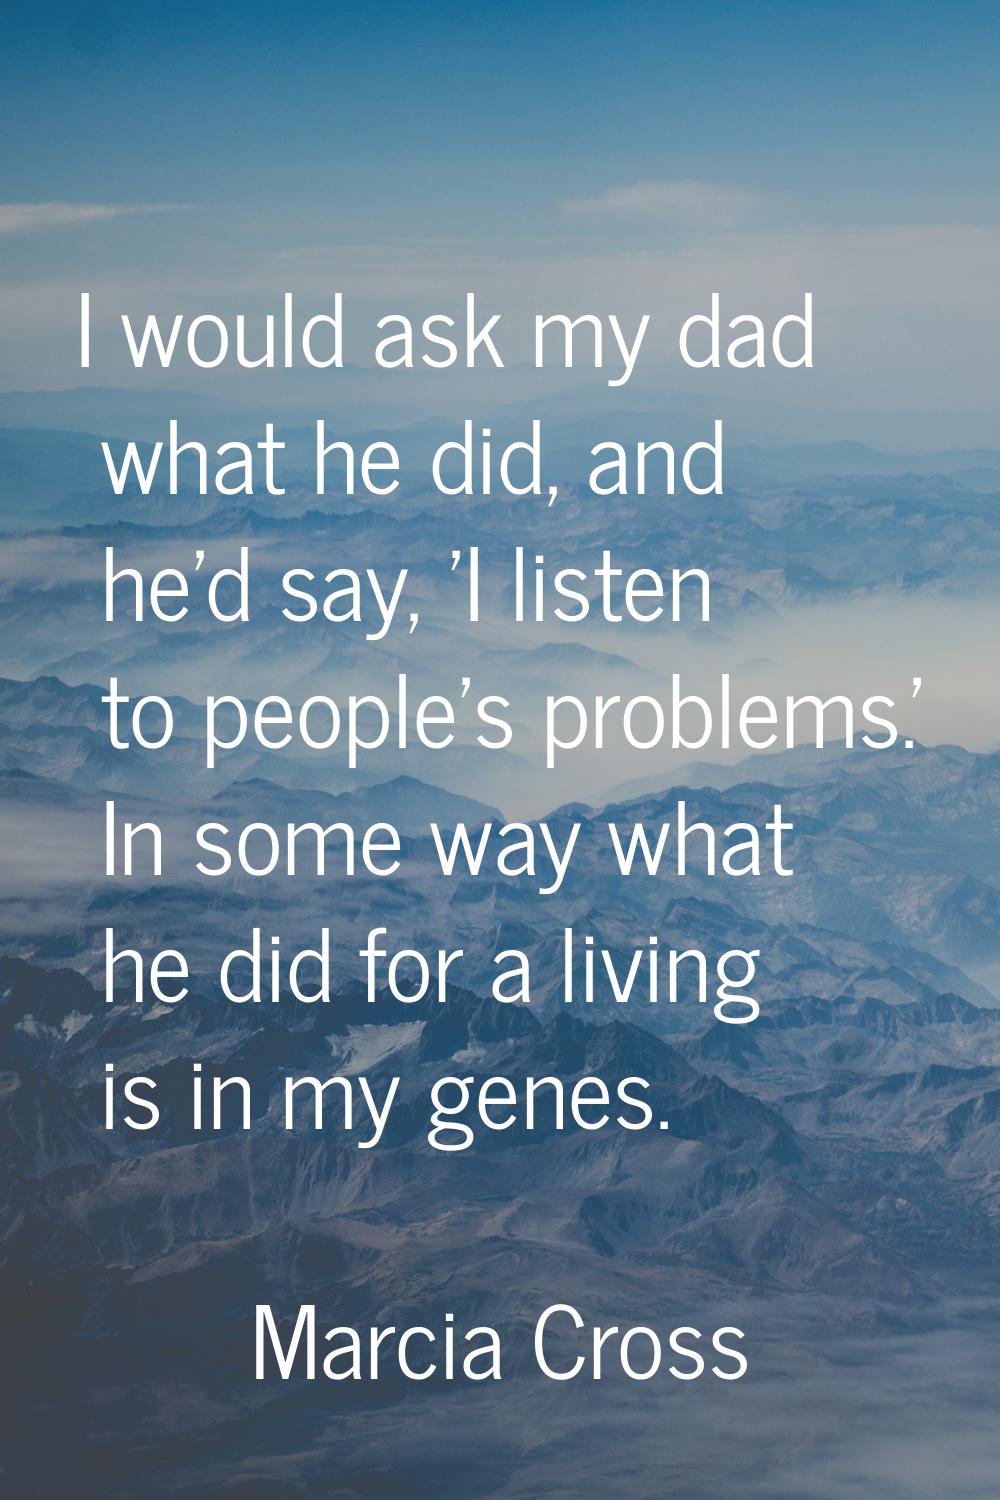 I would ask my dad what he did, and he'd say, 'I listen to people's problems.' In some way what he 